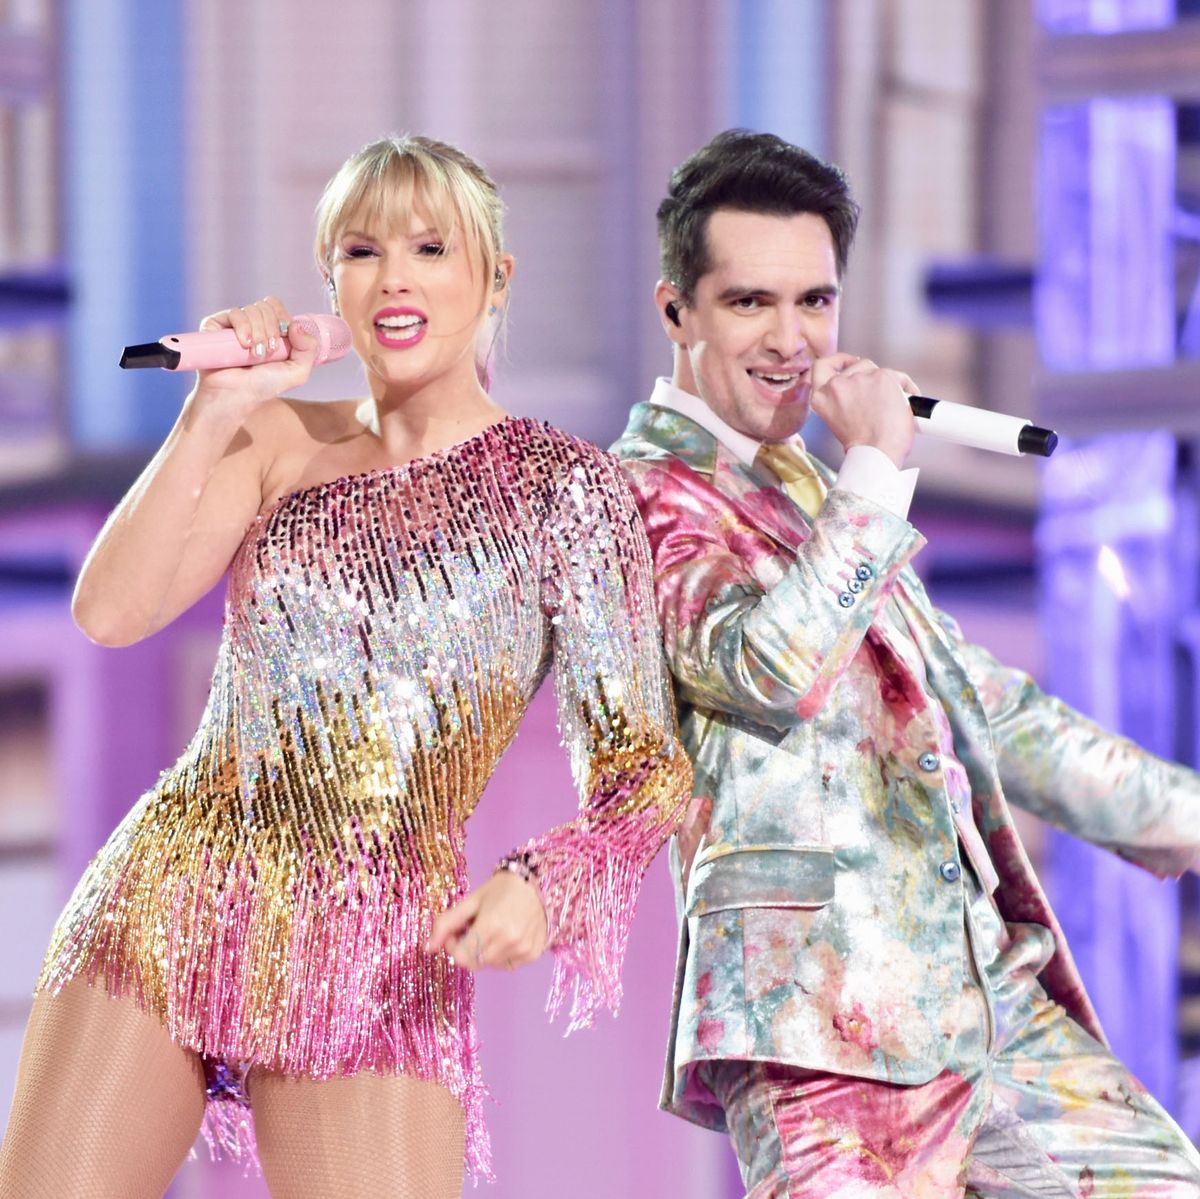 See Taylor Swift and Brendon Urie's Billboard Music Awards 2019 Performance of 'ME!'